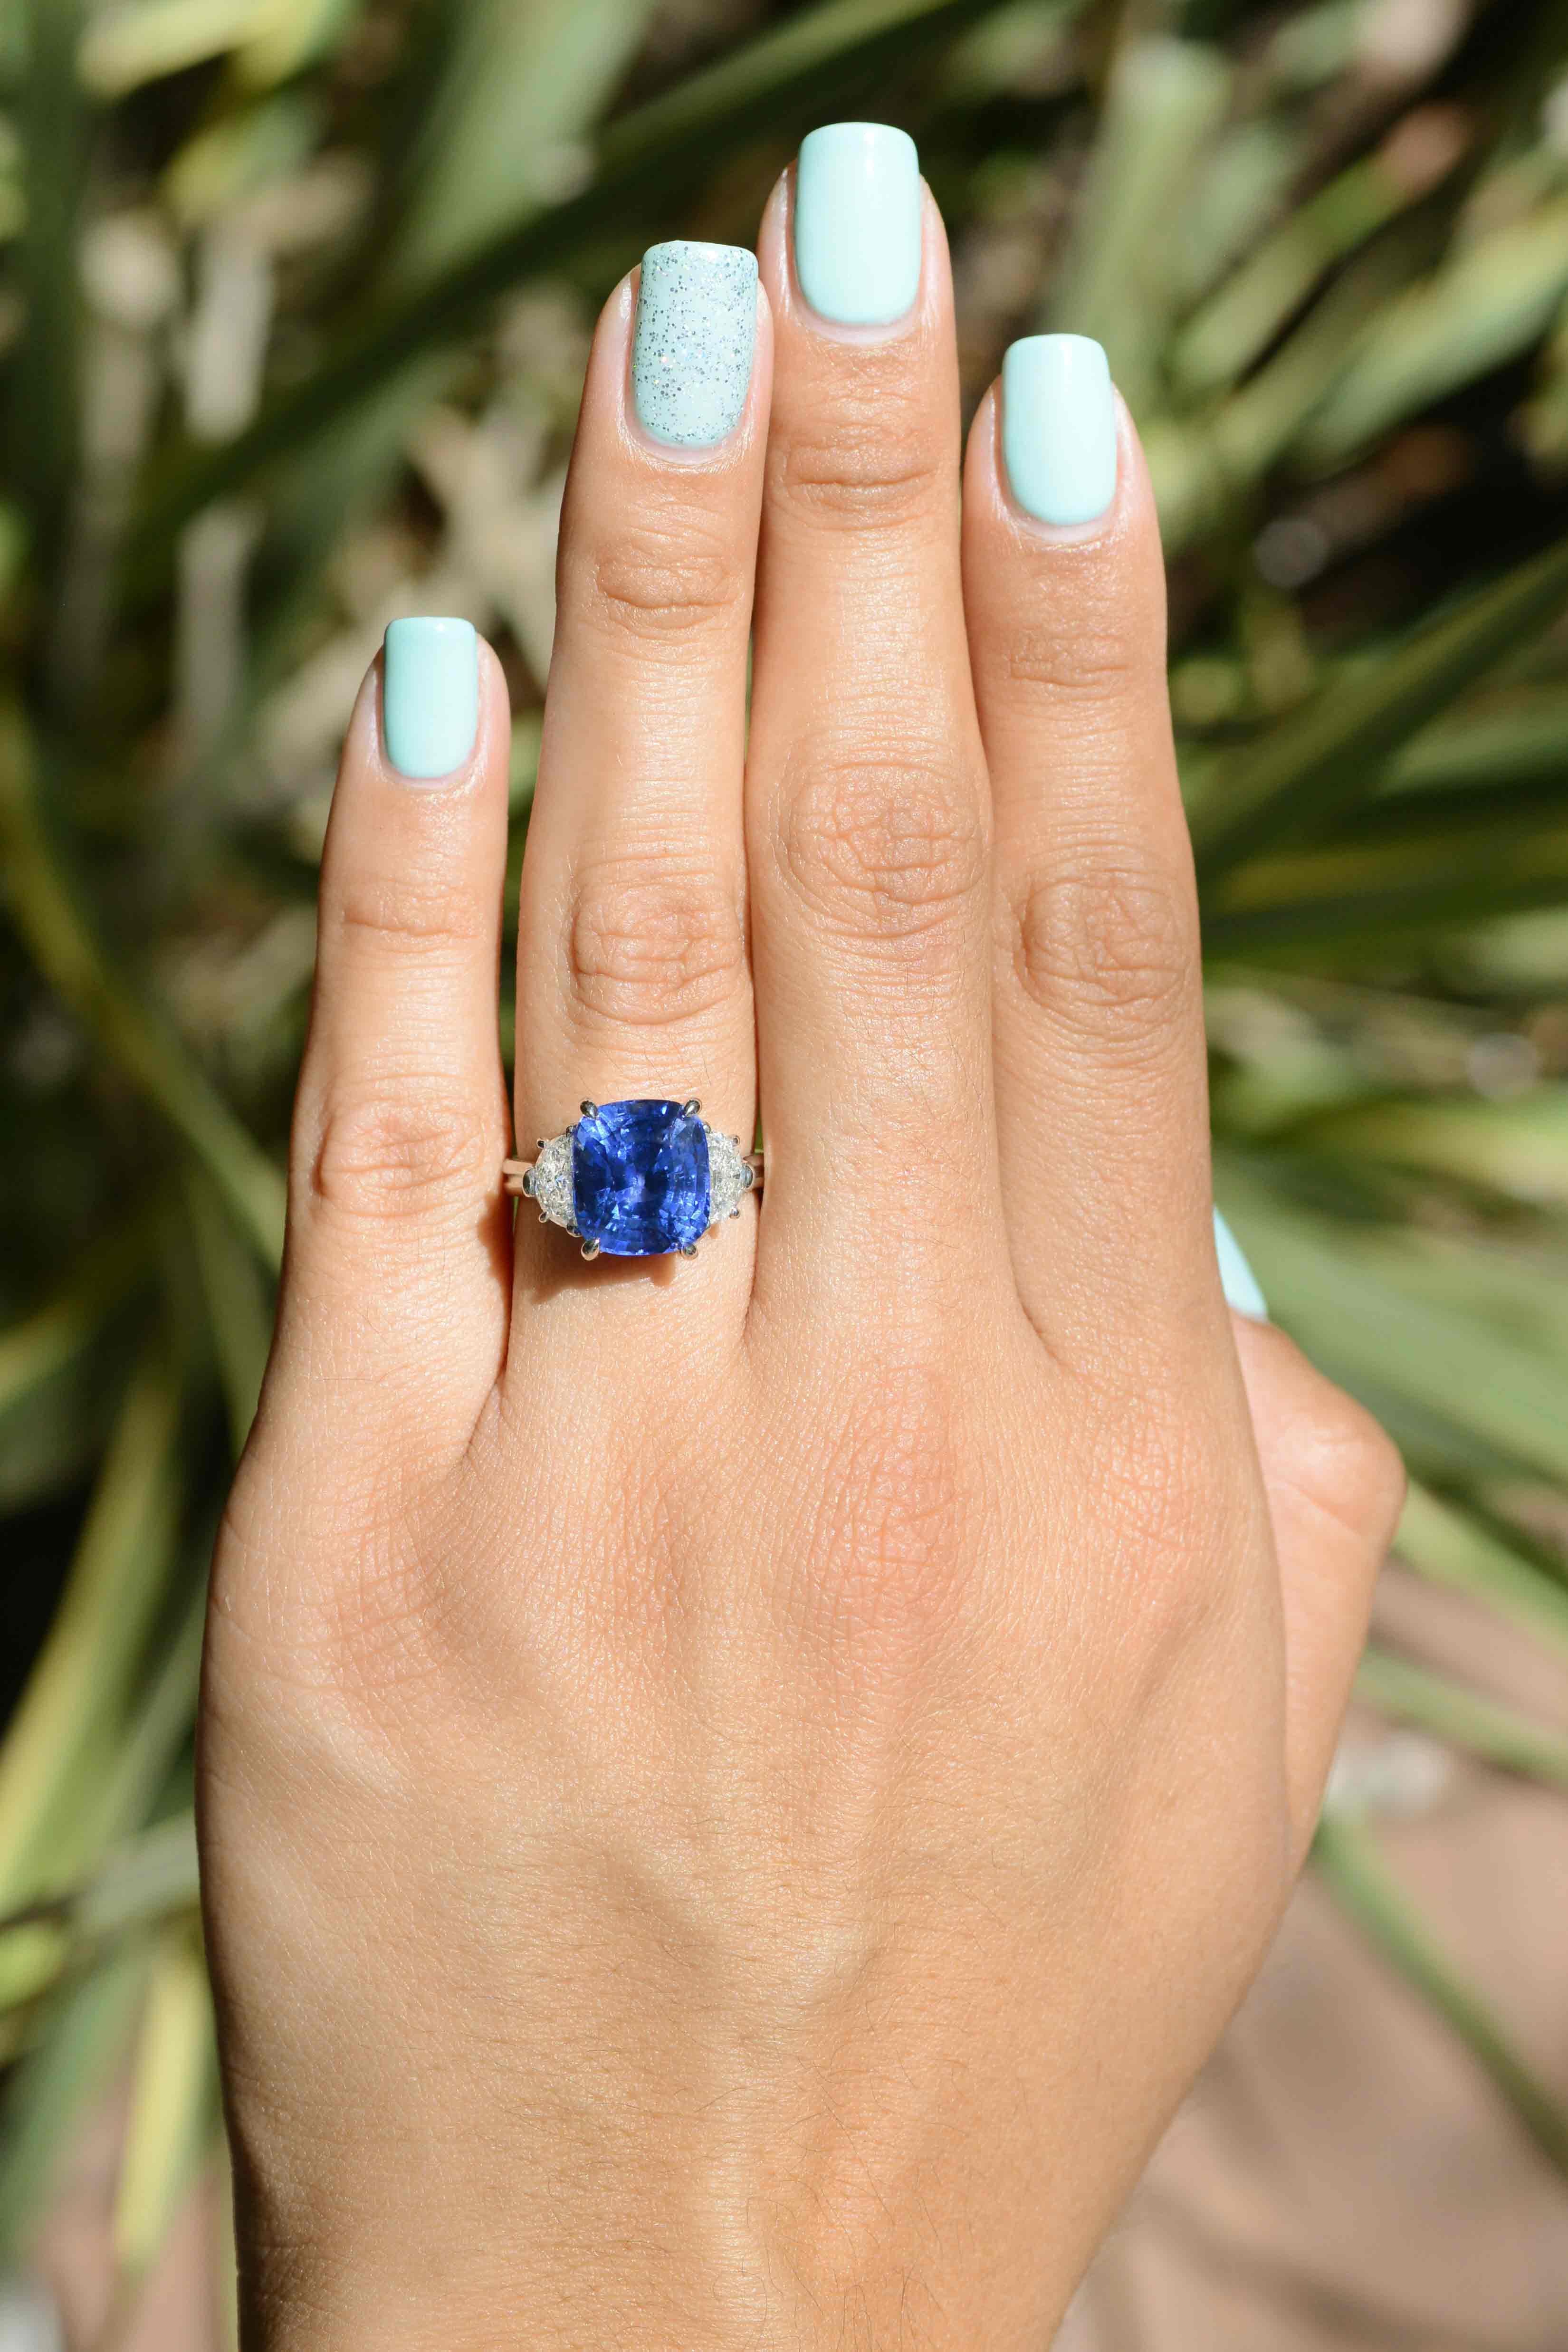 This glamorous sapphire and diamond 3 stone ring is an absolute beauty. The rich blue sapphire has an intense and vivid color that is hugged by 2 glimmering, uniquely cut half moon diamonds. Similar to Tiffany & Co. sapphire rings in styling and